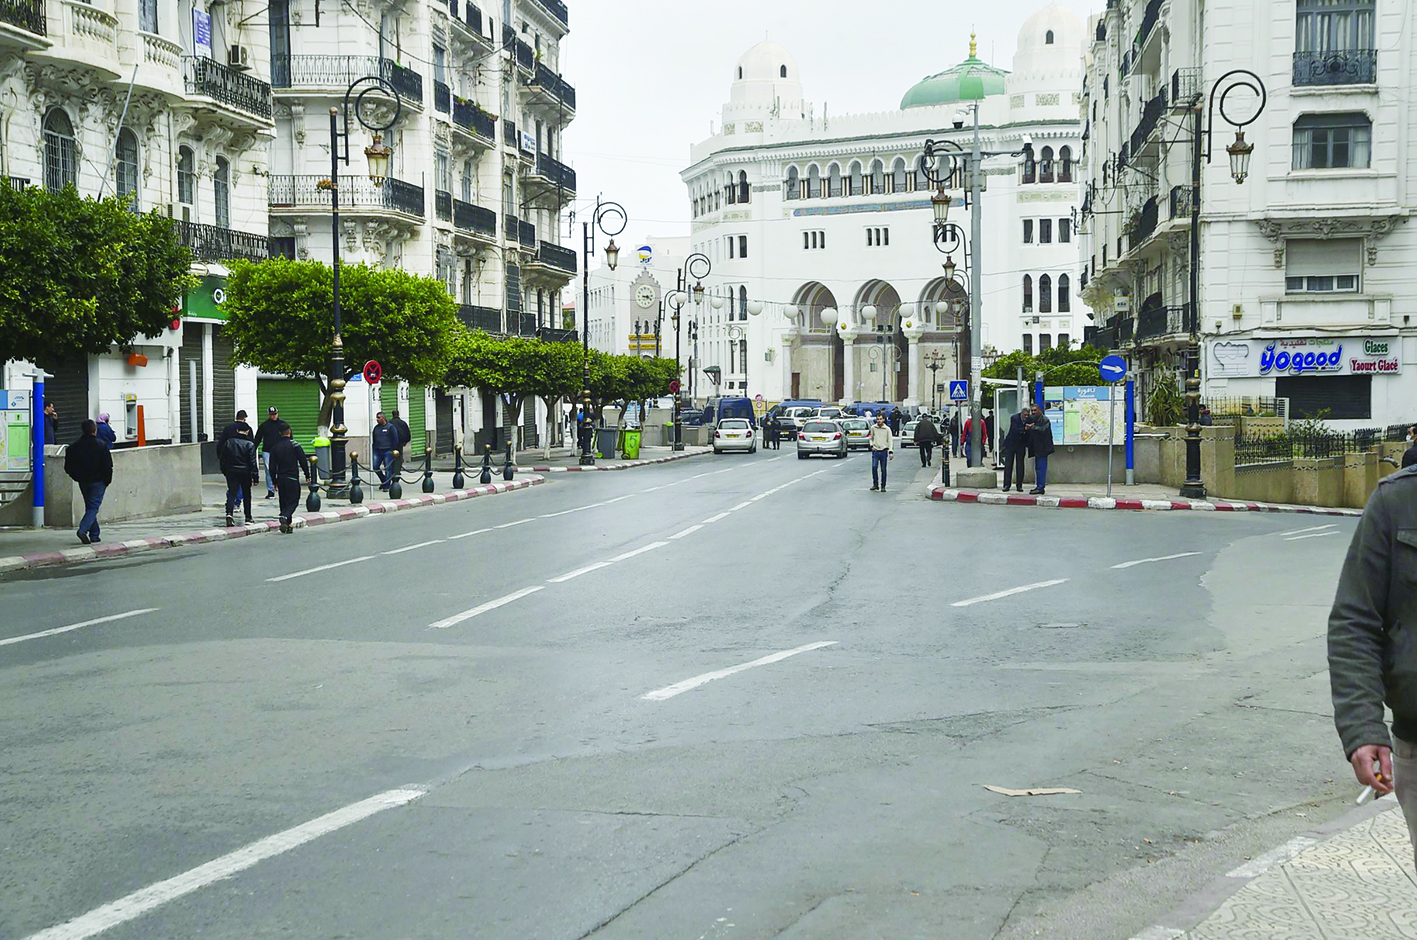 An empty street in the Algerian capital Algiers on March 20, 2020. - A total of 82 cases of coronavirus COVID-19 have been confirmed in Algeria, according to the health ministry. An 83rd case was detected in an Italian national, who has since returned to Italy. Two more virus deaths were registered in Algeria yesterday, the health ministry said, bringing to eight the number of fatalities from COVID-19 since the first case was registered in the country at the end of February. (Photo by RYAD KRAMDI / AFP)